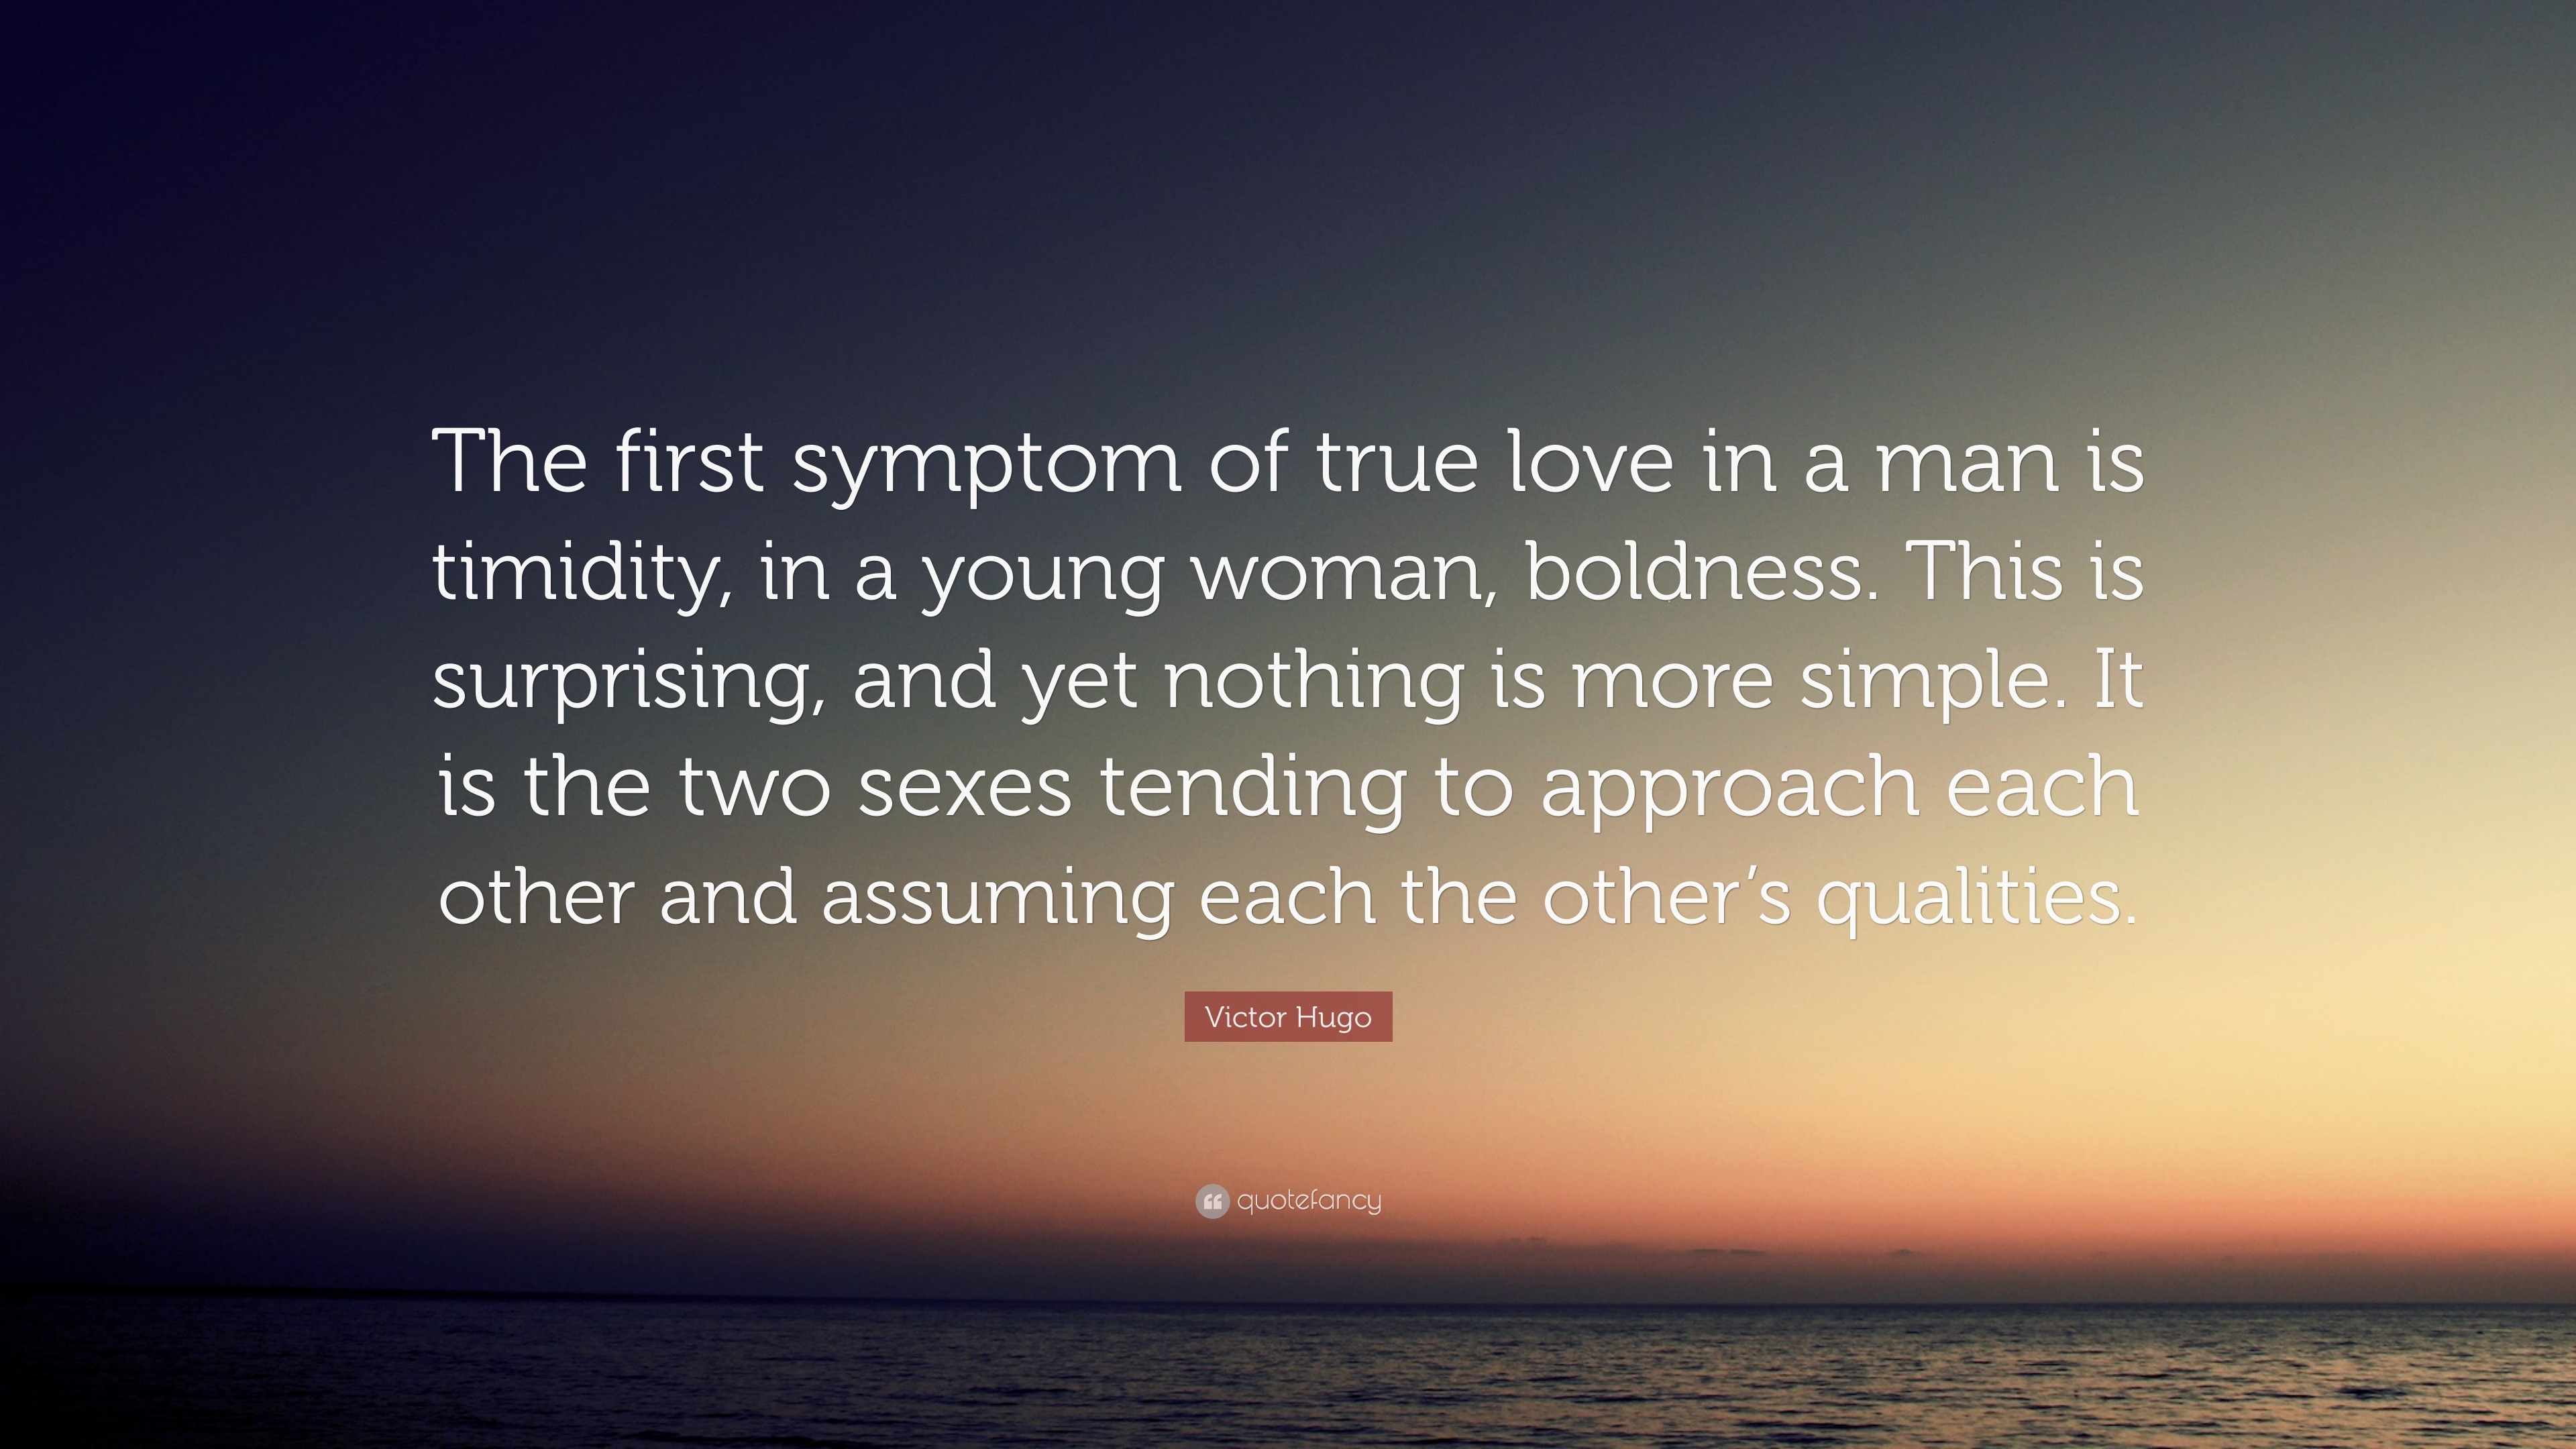 Victor Hugo Quote “The first symptom of true love in a man is timidity